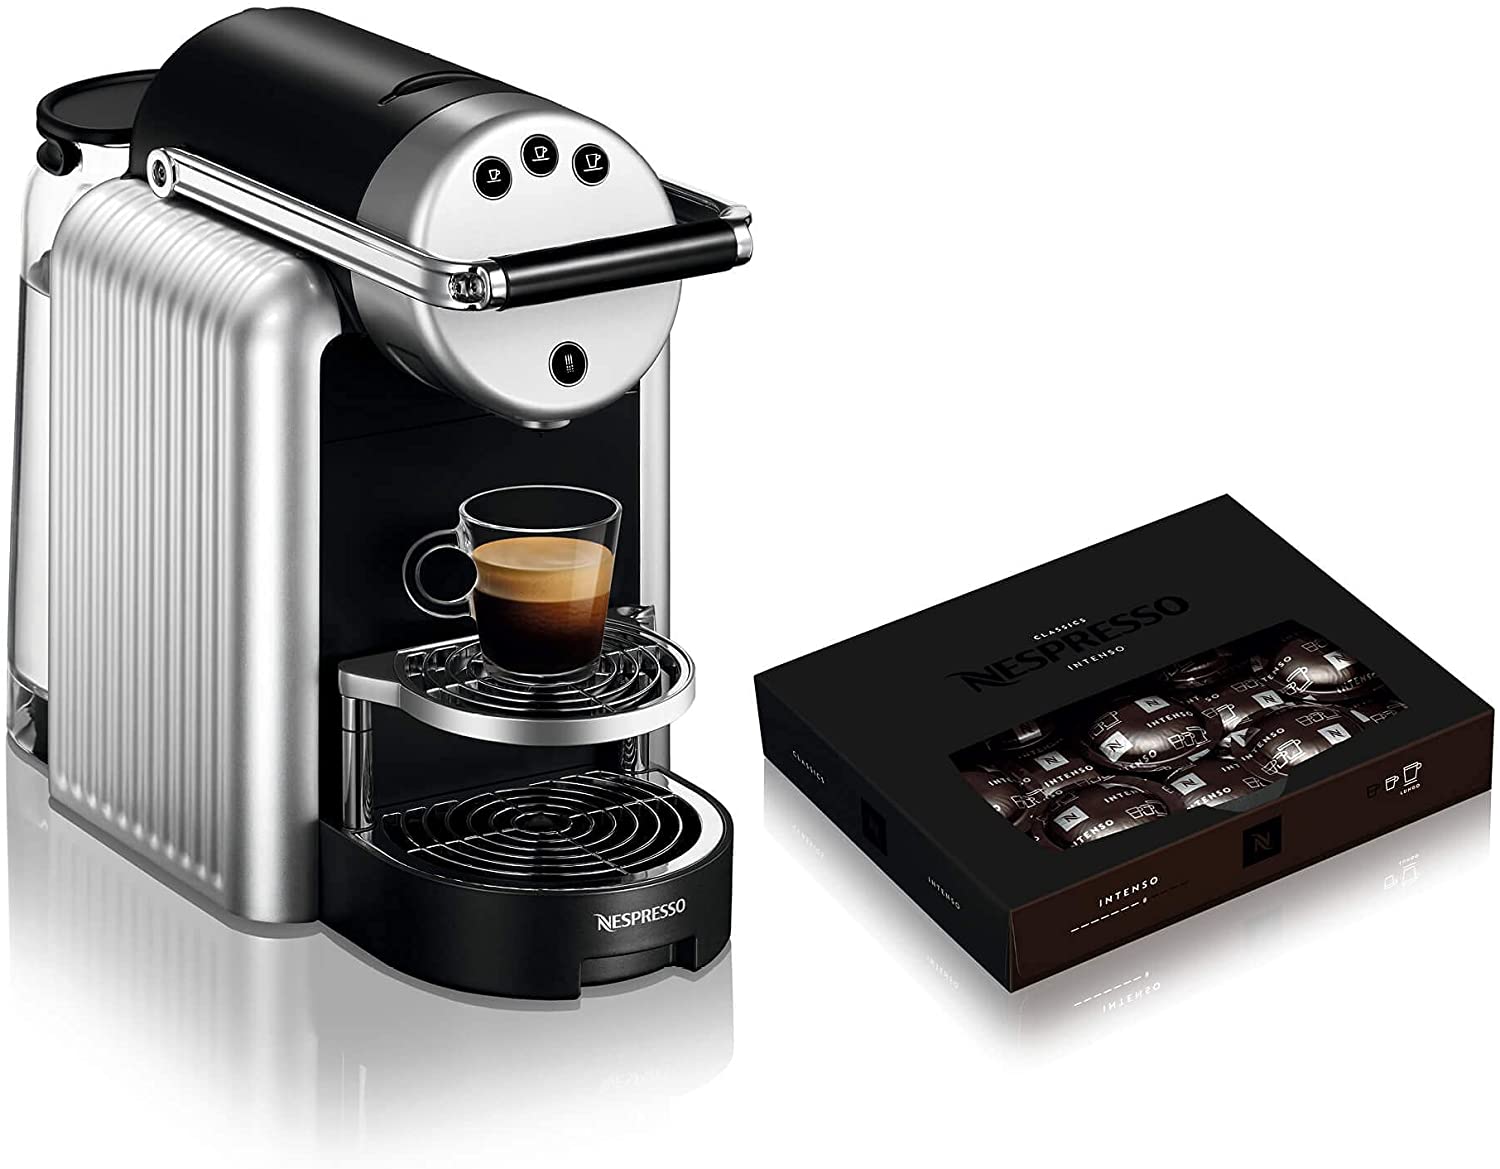 NESPRESSO Professional Zenius Coffee Machine with 50 Coffee Capsules - Efficient Coffee Maker Ideal for Small Offices or Conference Rooms - Silver